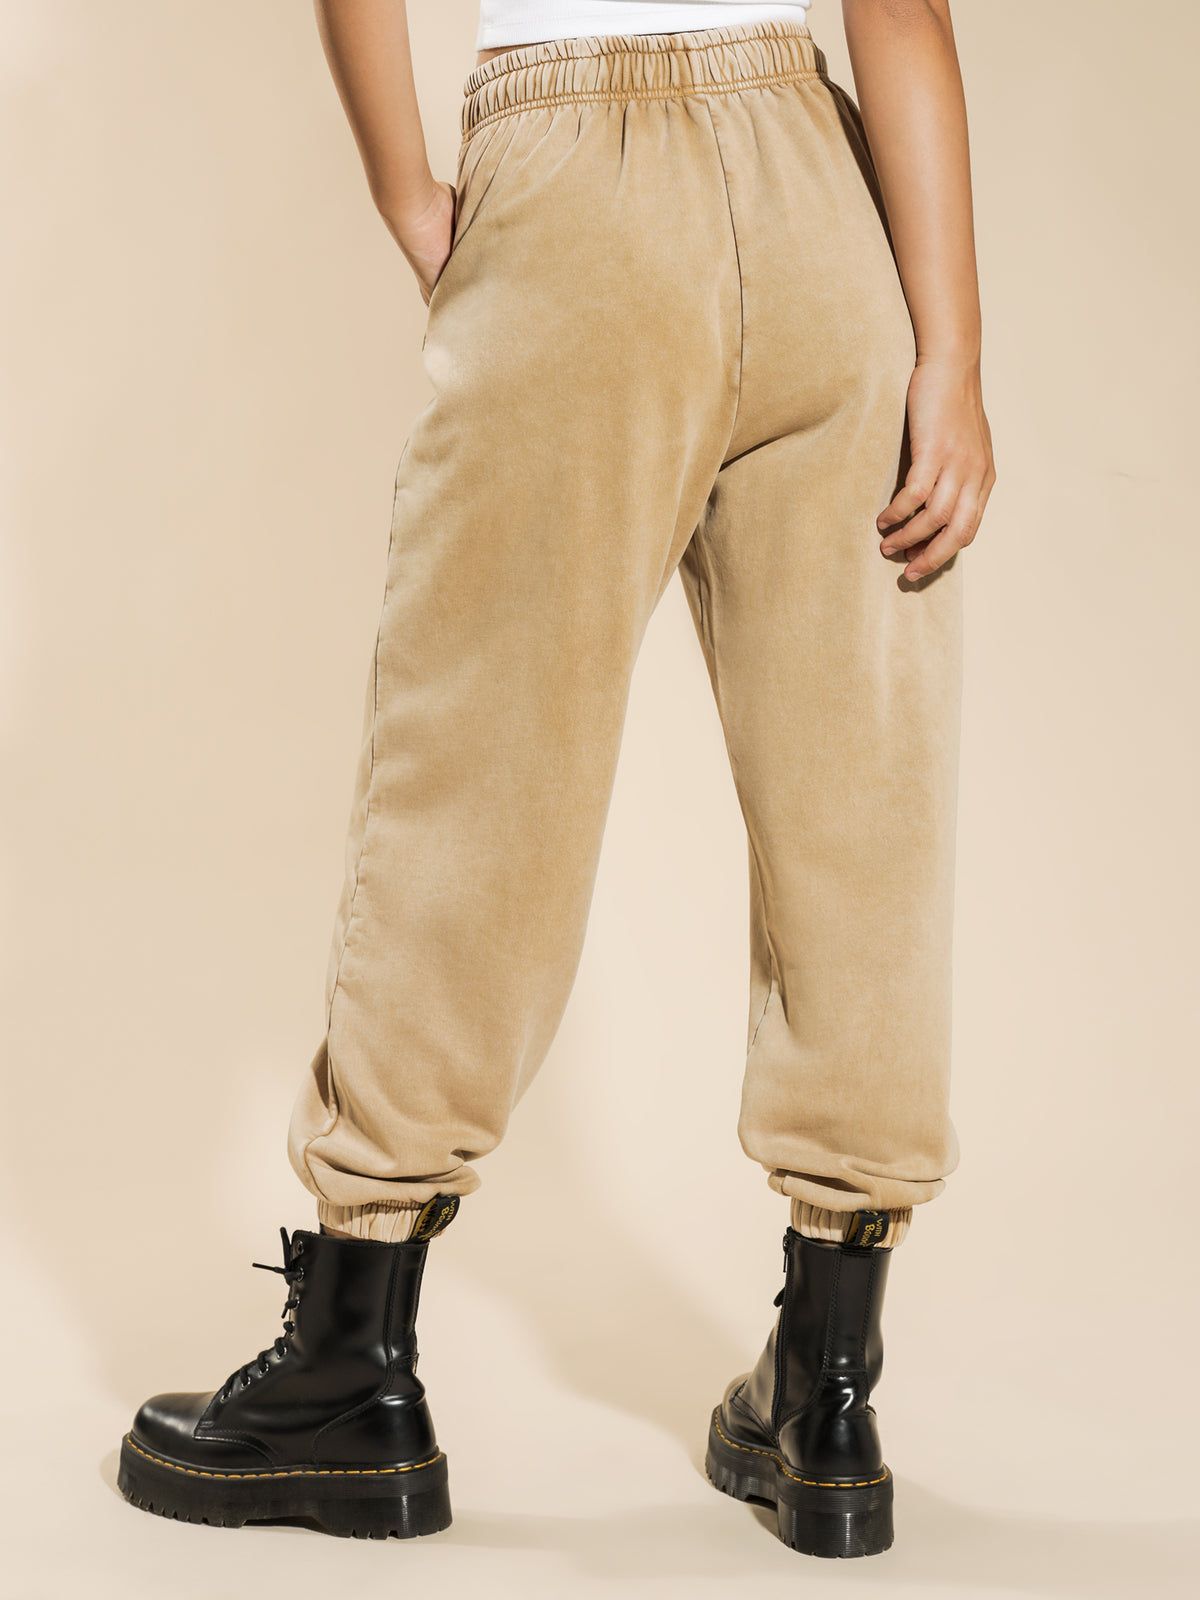 Beyond Acid Trackpants in Washed Sand